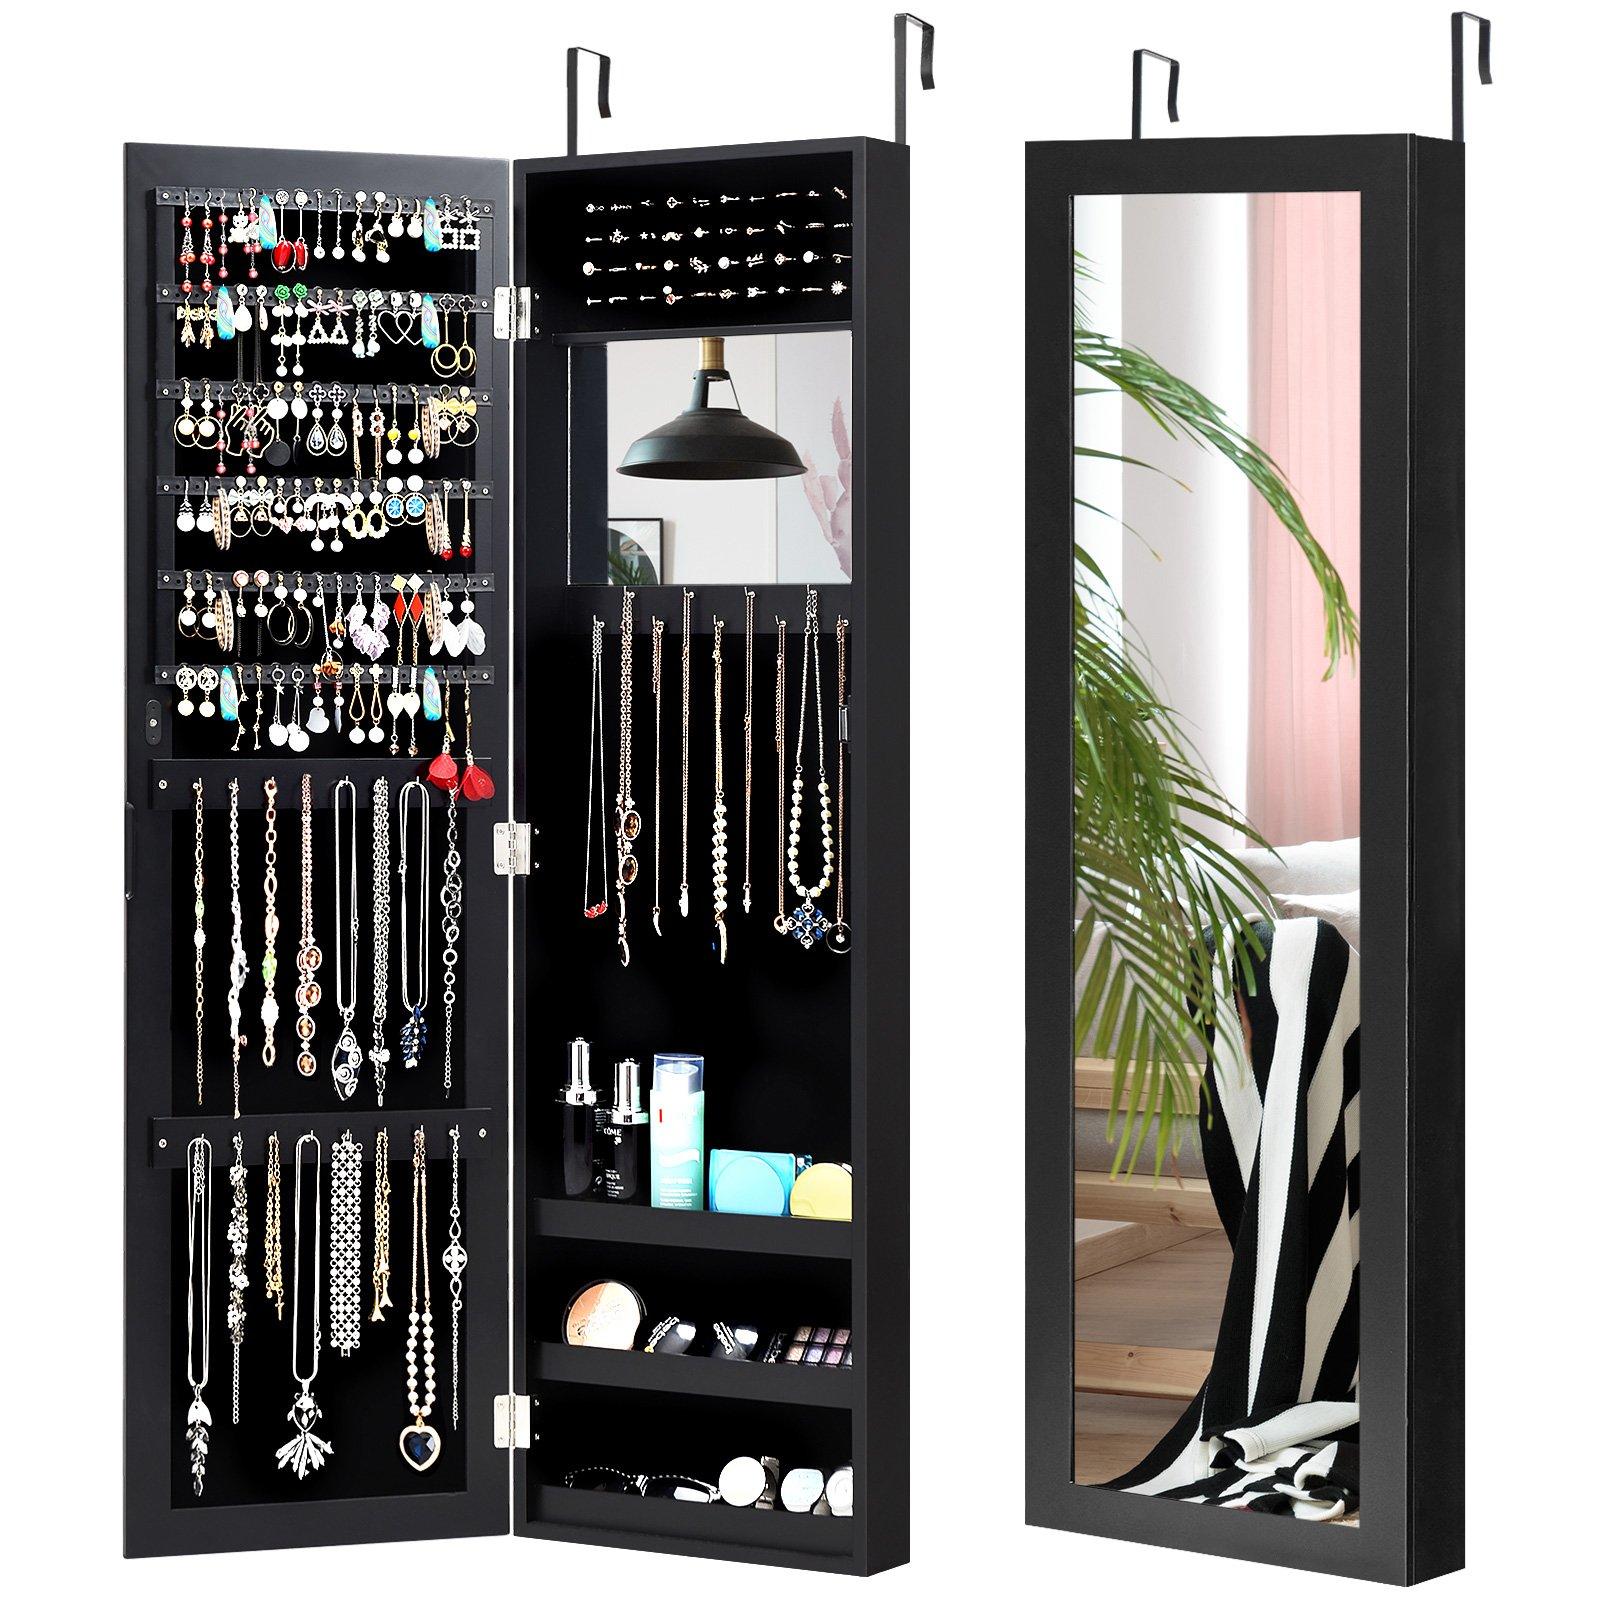 Wall-mounted Jewelry Storage Cabinet Door Hanging Jewelry Armoire w/ Full Mirror